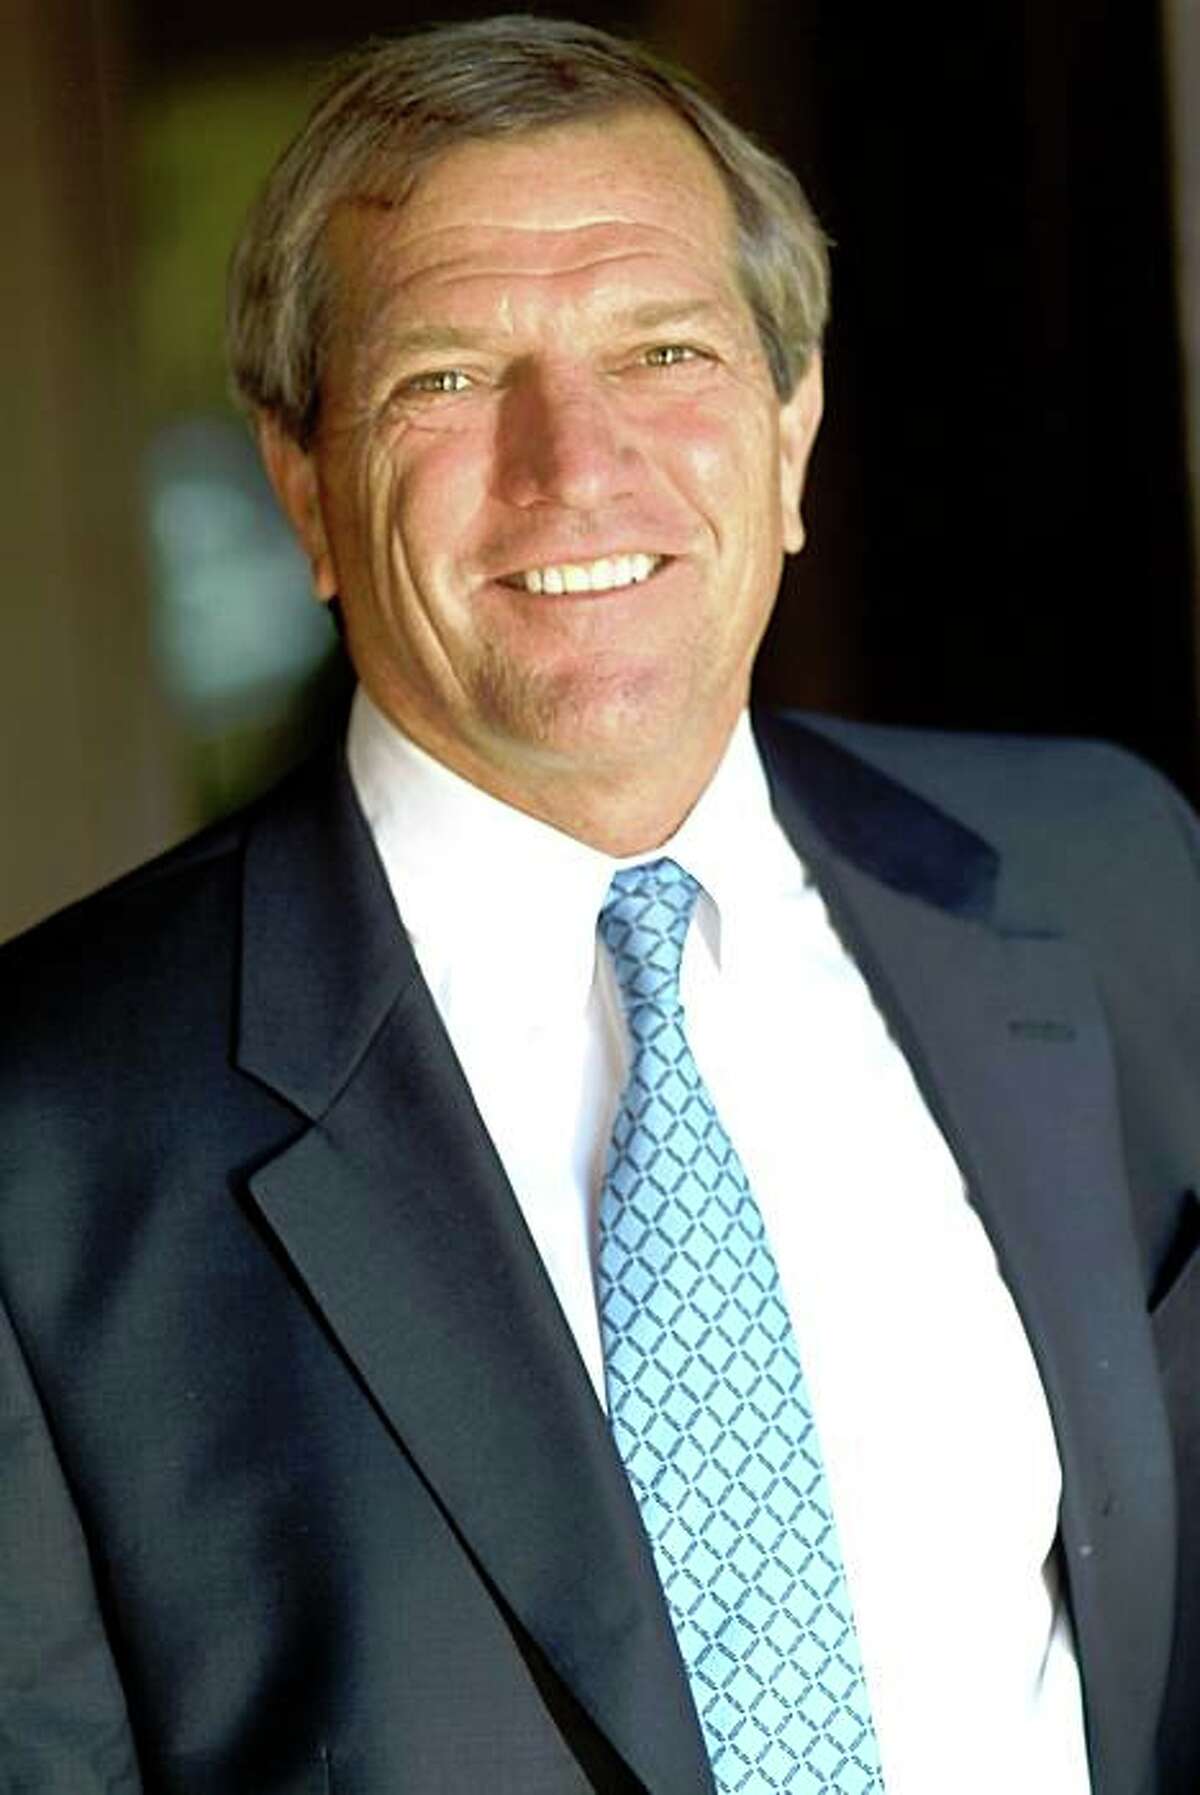 Mark DeSaulnier of Concord is running for Congress in California's 10th Congressional District. The special primary election will be held Sept. 1, 2009.